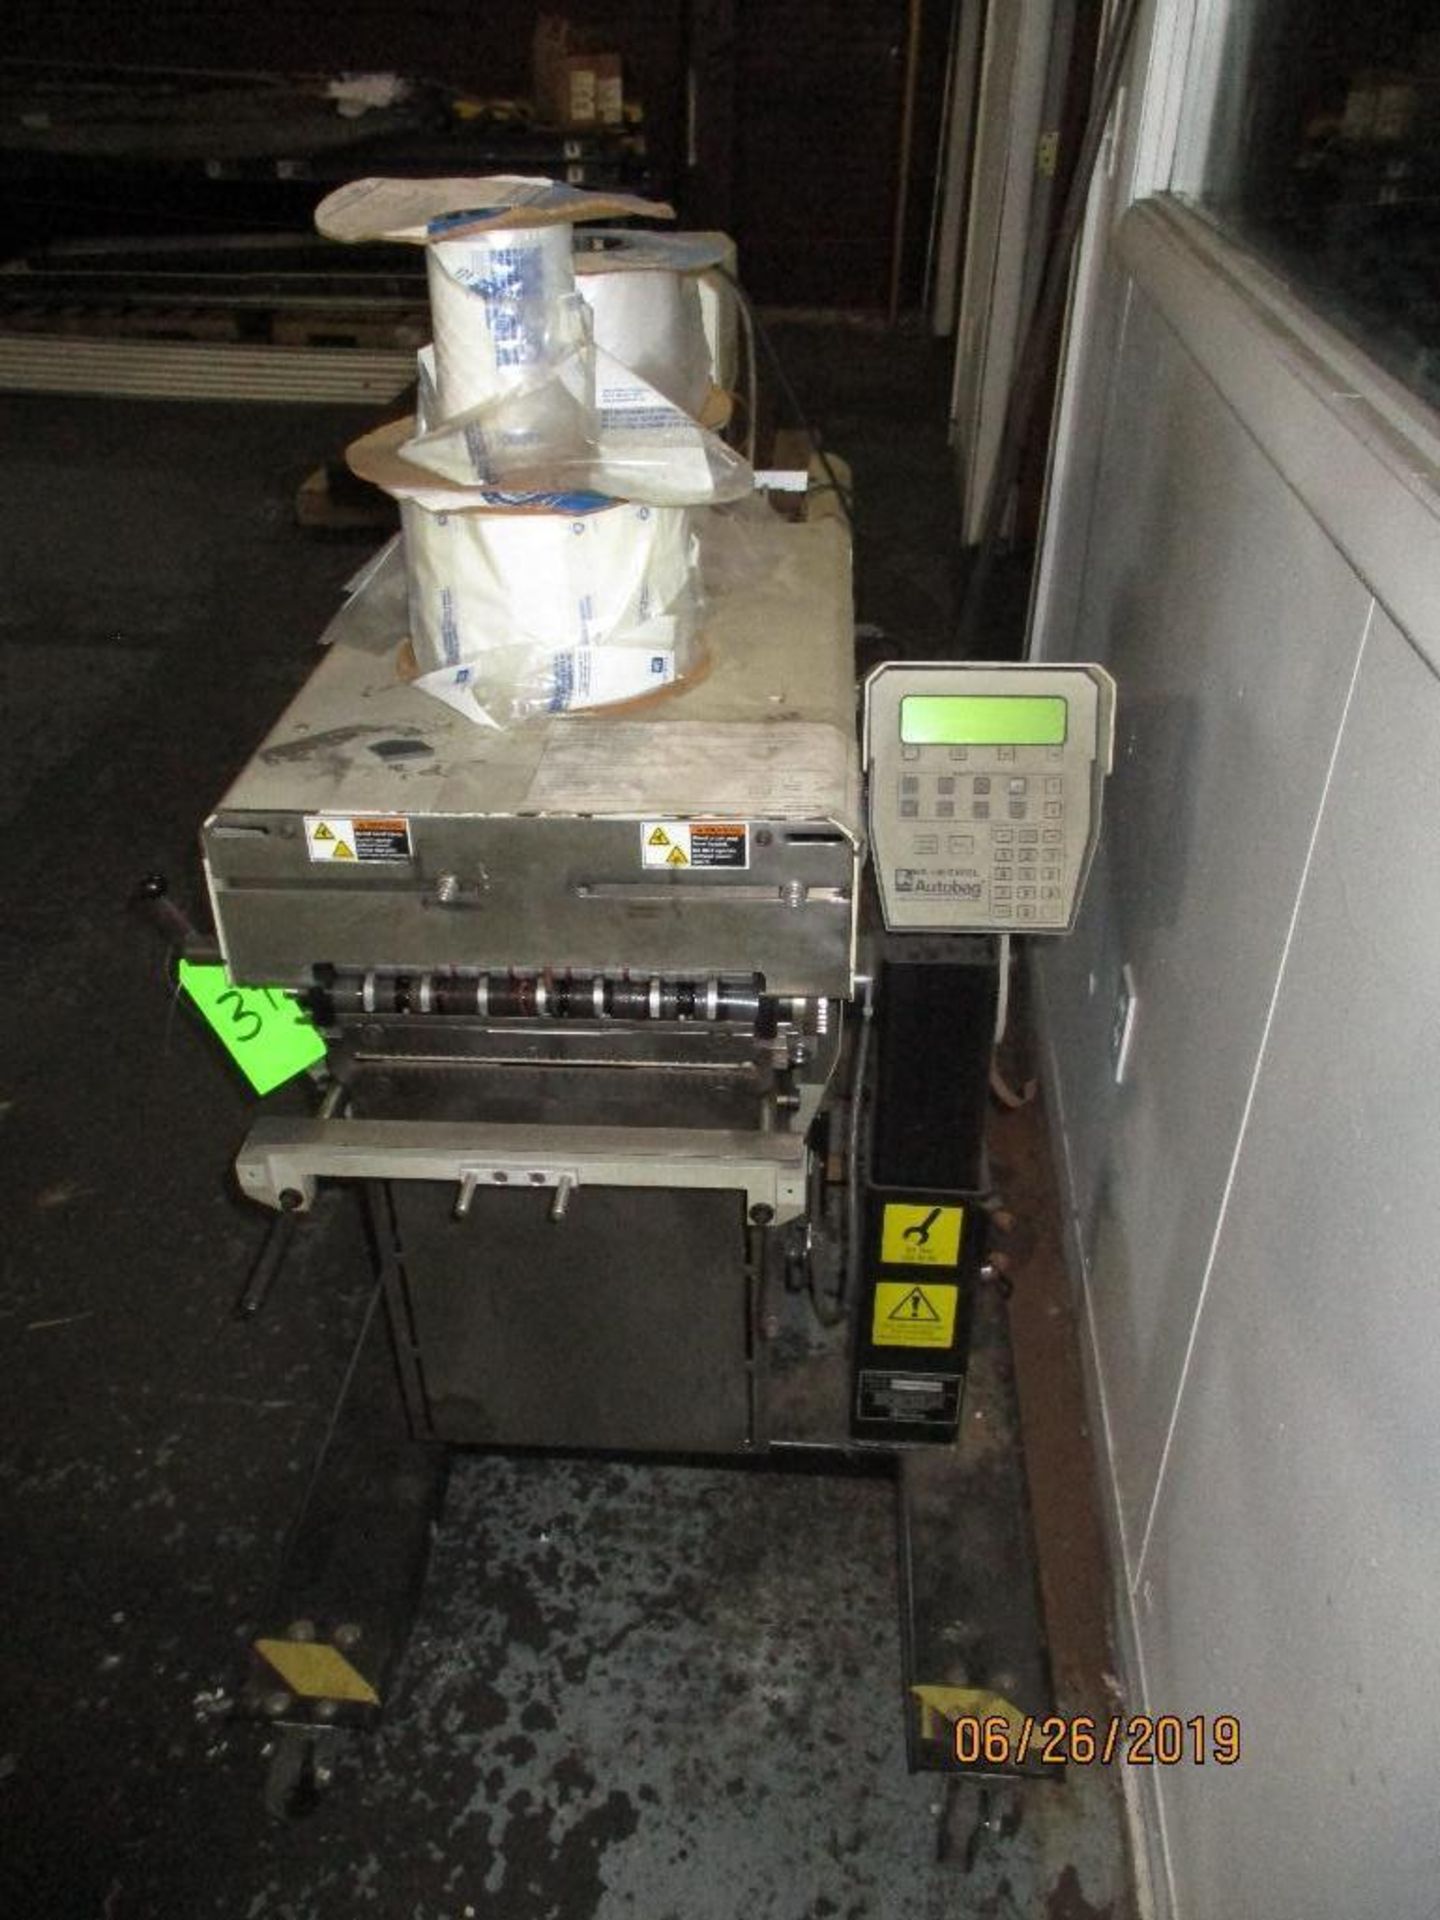 HS-100 Excel Auto Bag Machine S/N 98-12X6-3334 With PI-4000 Auto Label Attached, Located at 800 West - Image 3 of 4